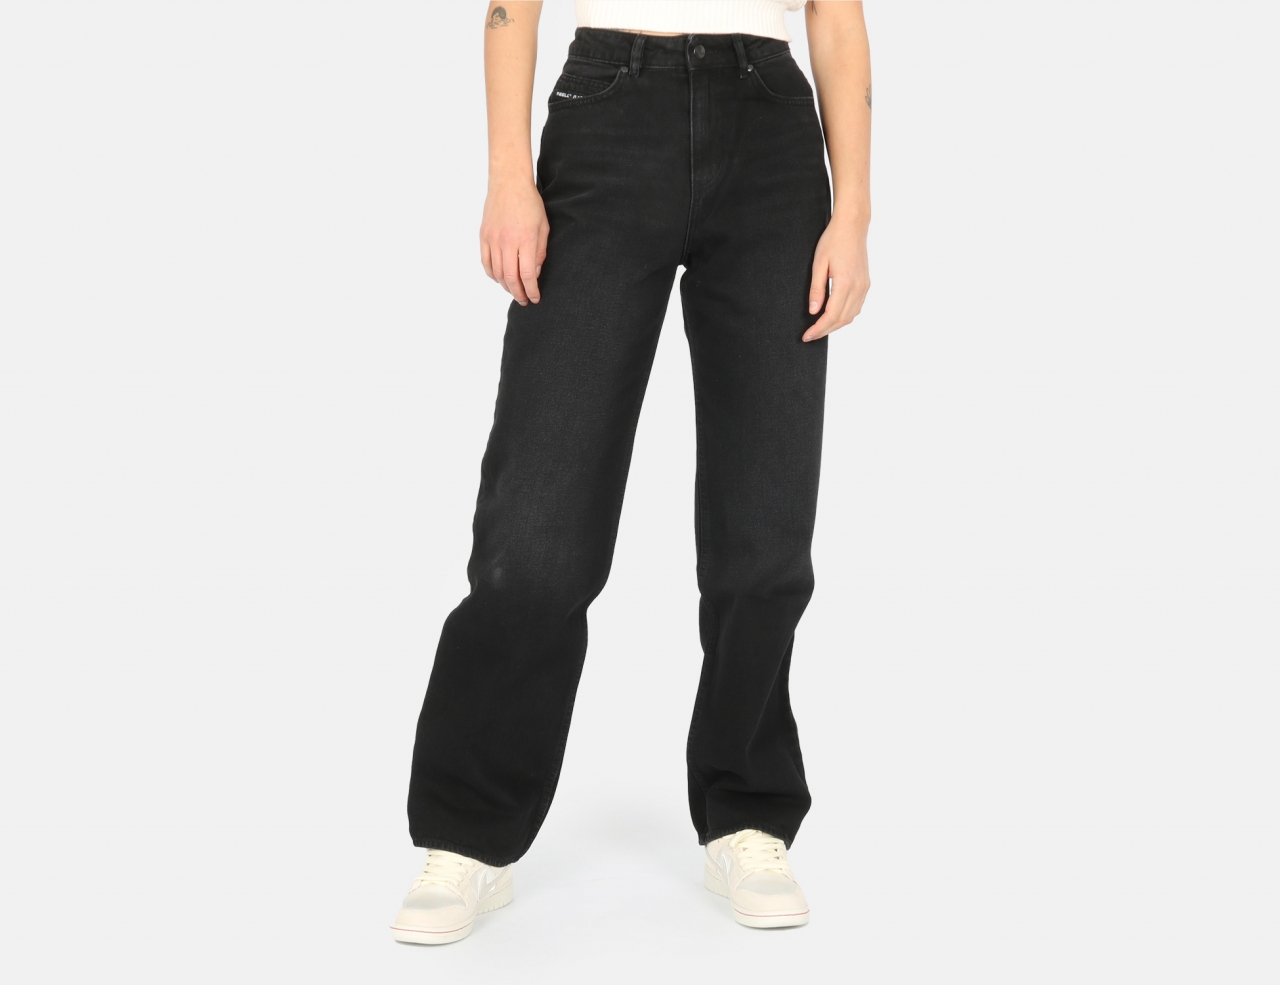 Reell Jeans W&#039; Betty Baggy Pant - Black Wash 50/50